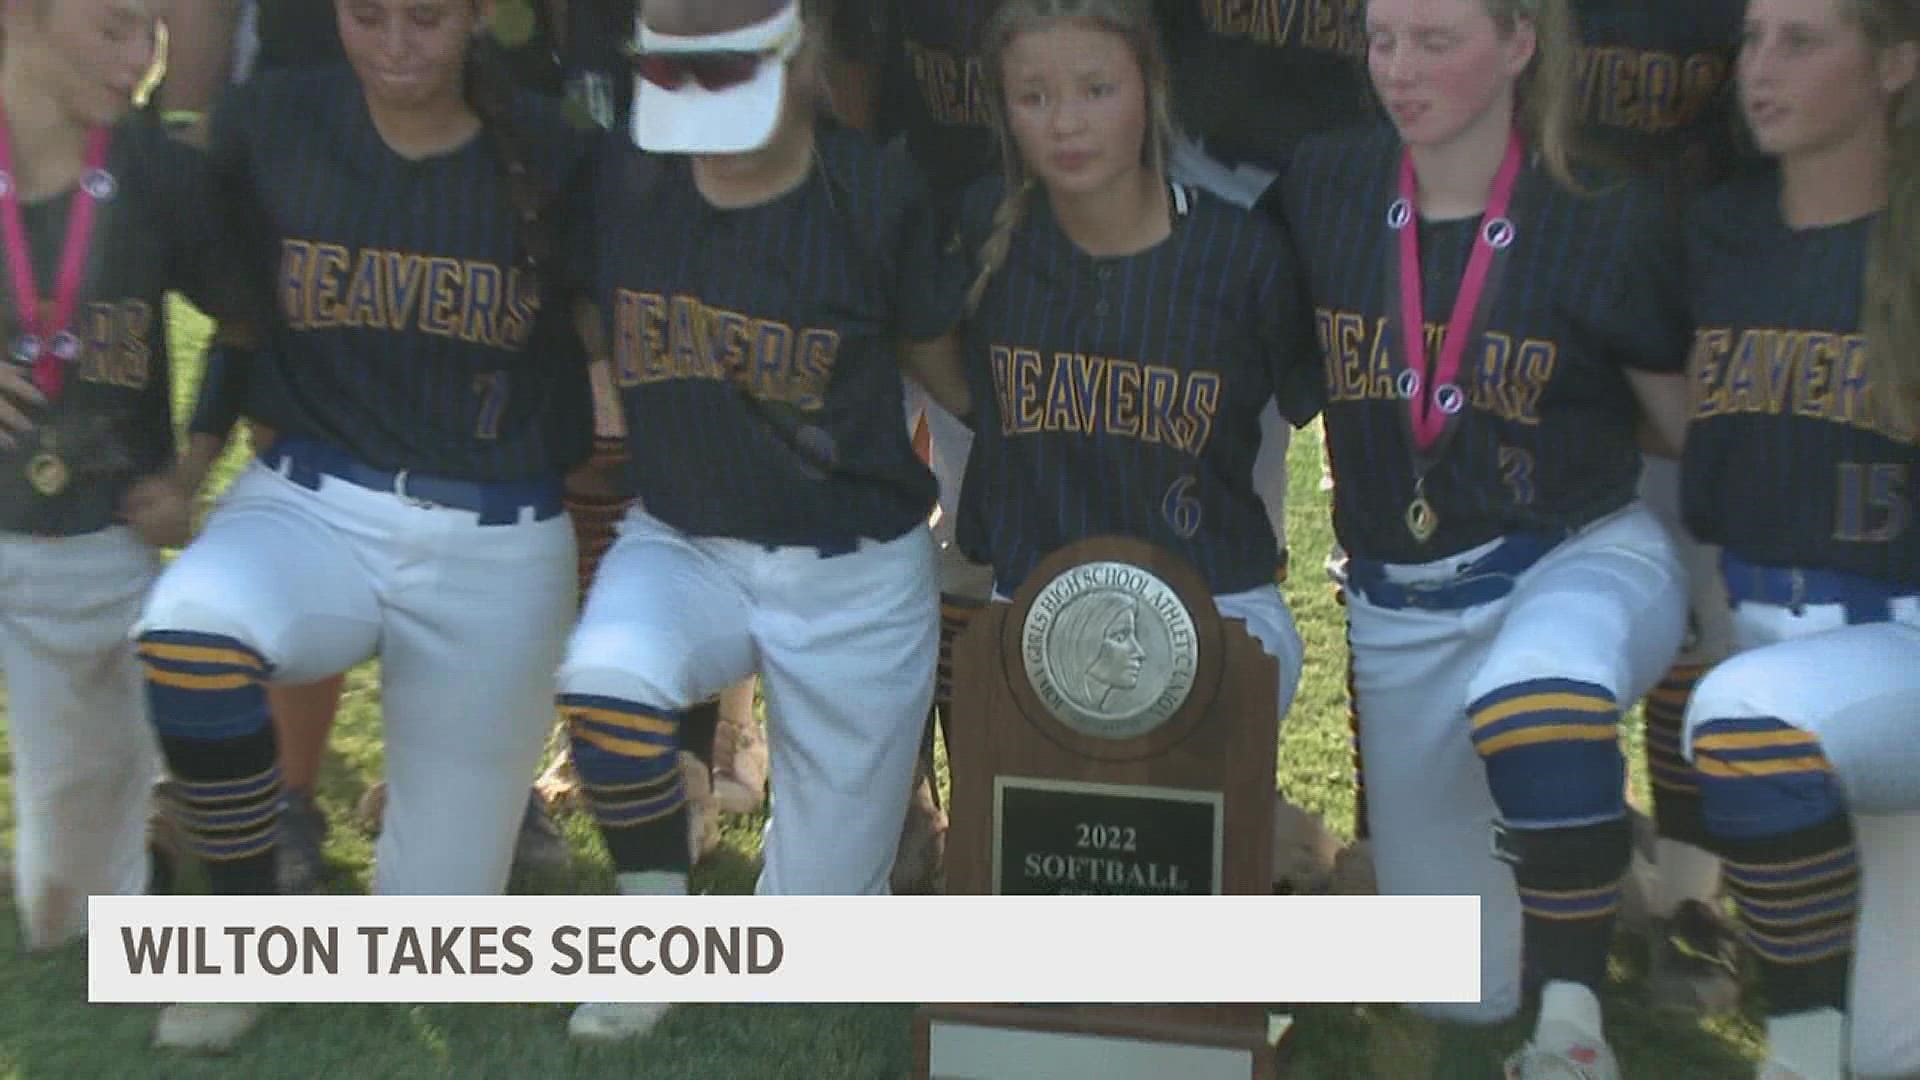 A historic season from Wilton softball ended just short of a State title, but it's still their highest achievement yet.